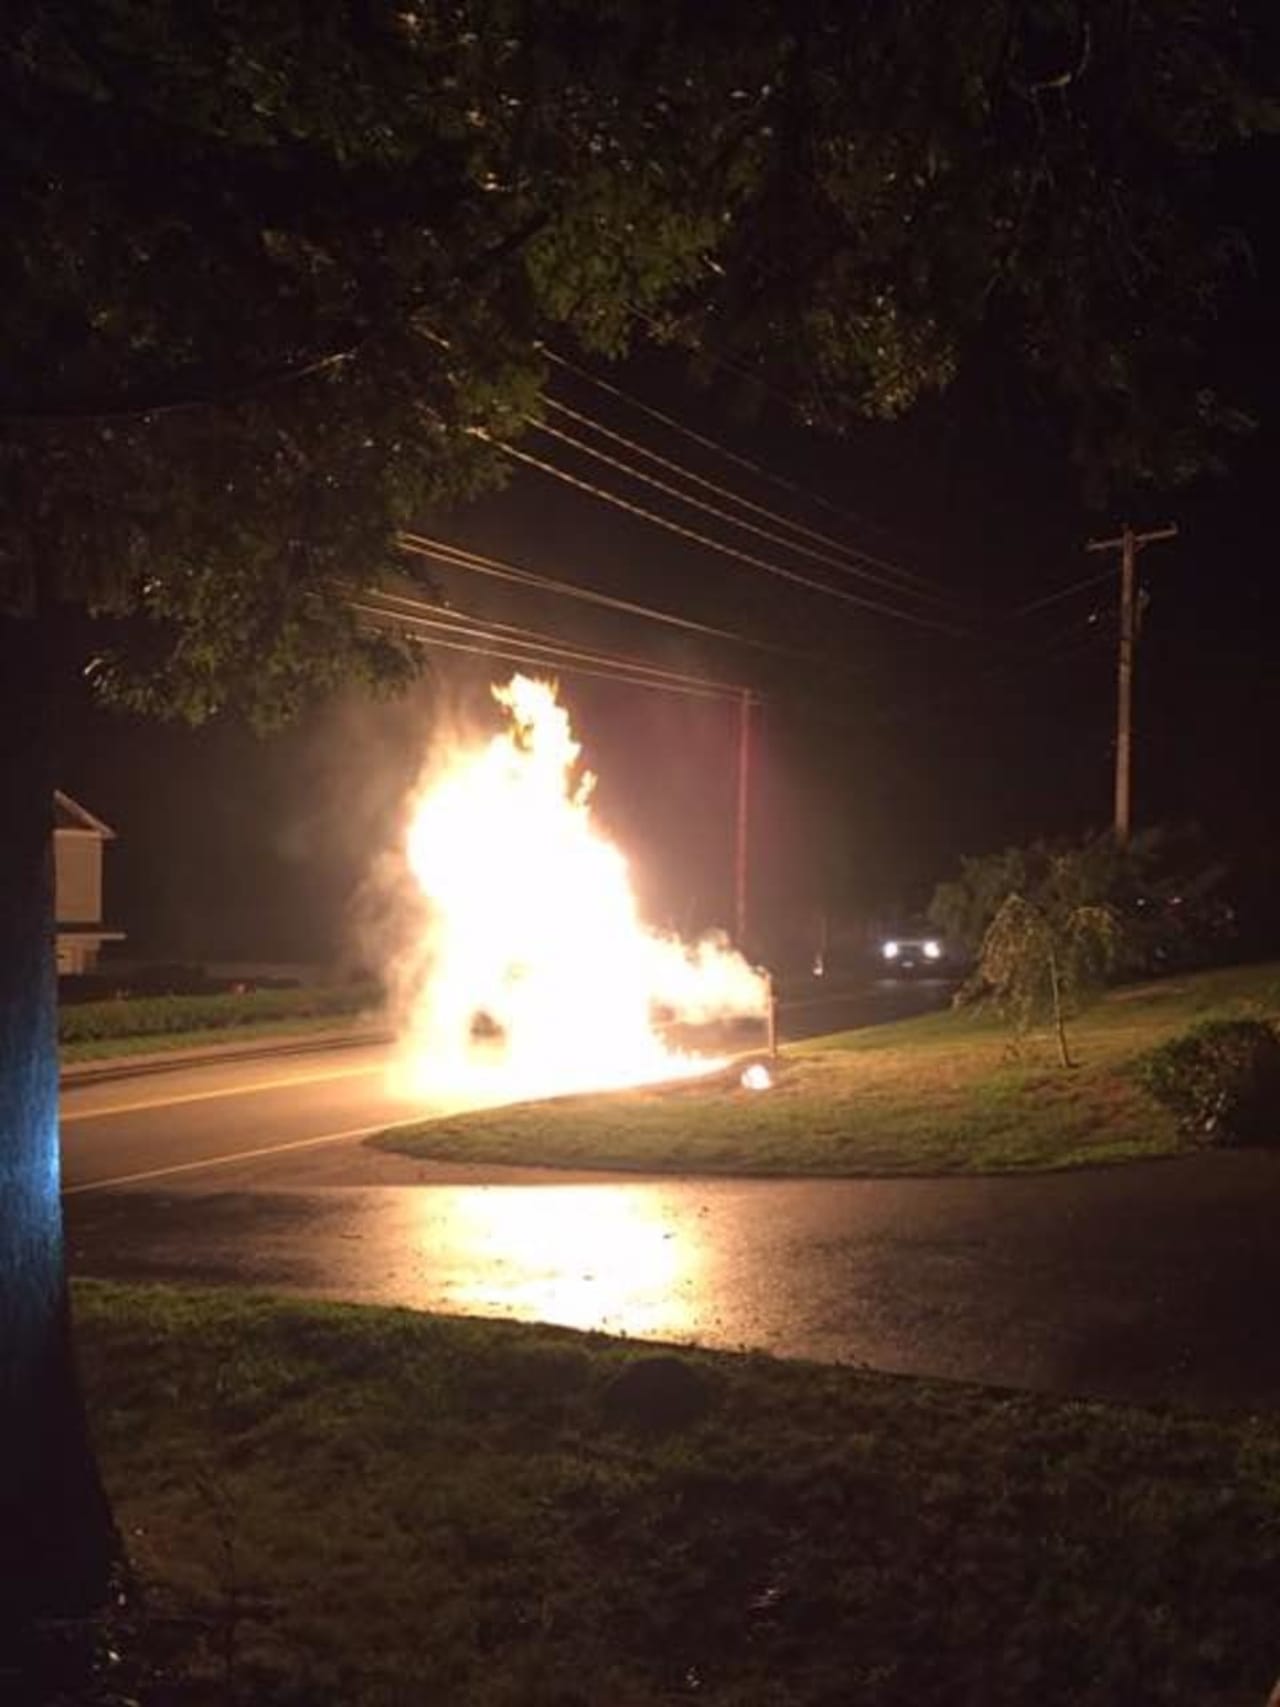 The fire in Trumbull was caused by downed electrical wires.